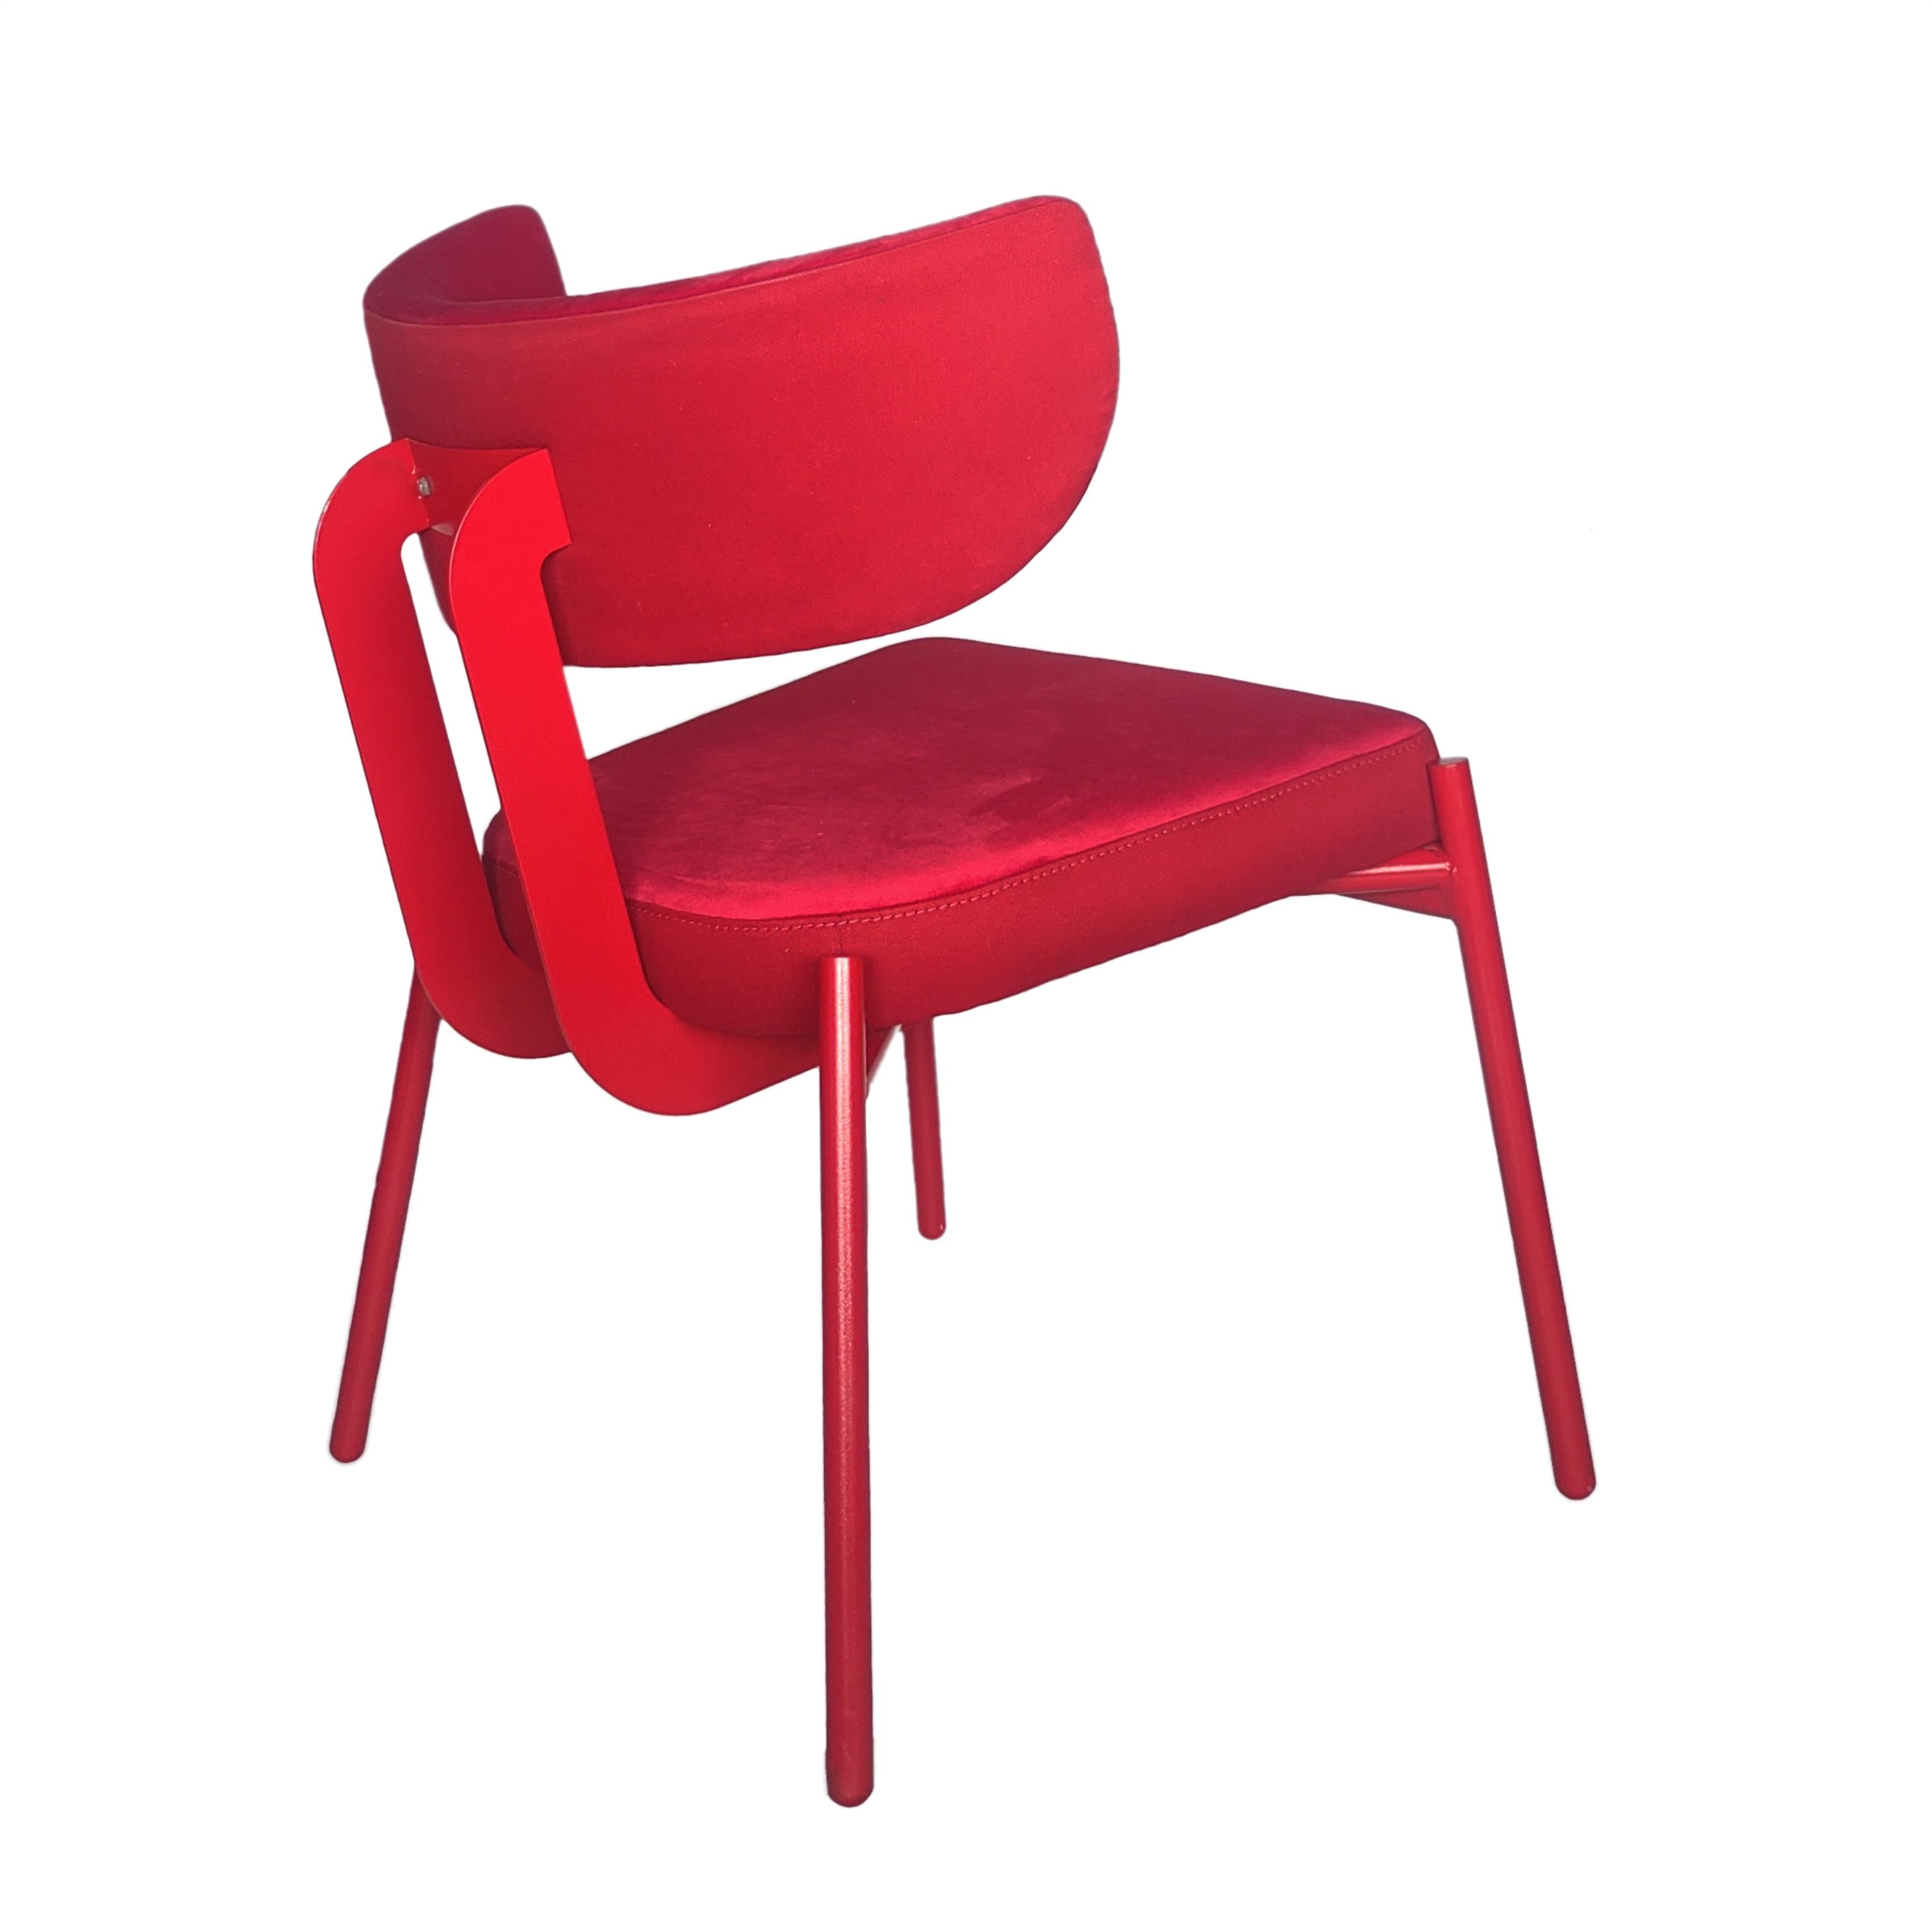 Brazilian Red Love chair by Gabriel Freitas For Sale